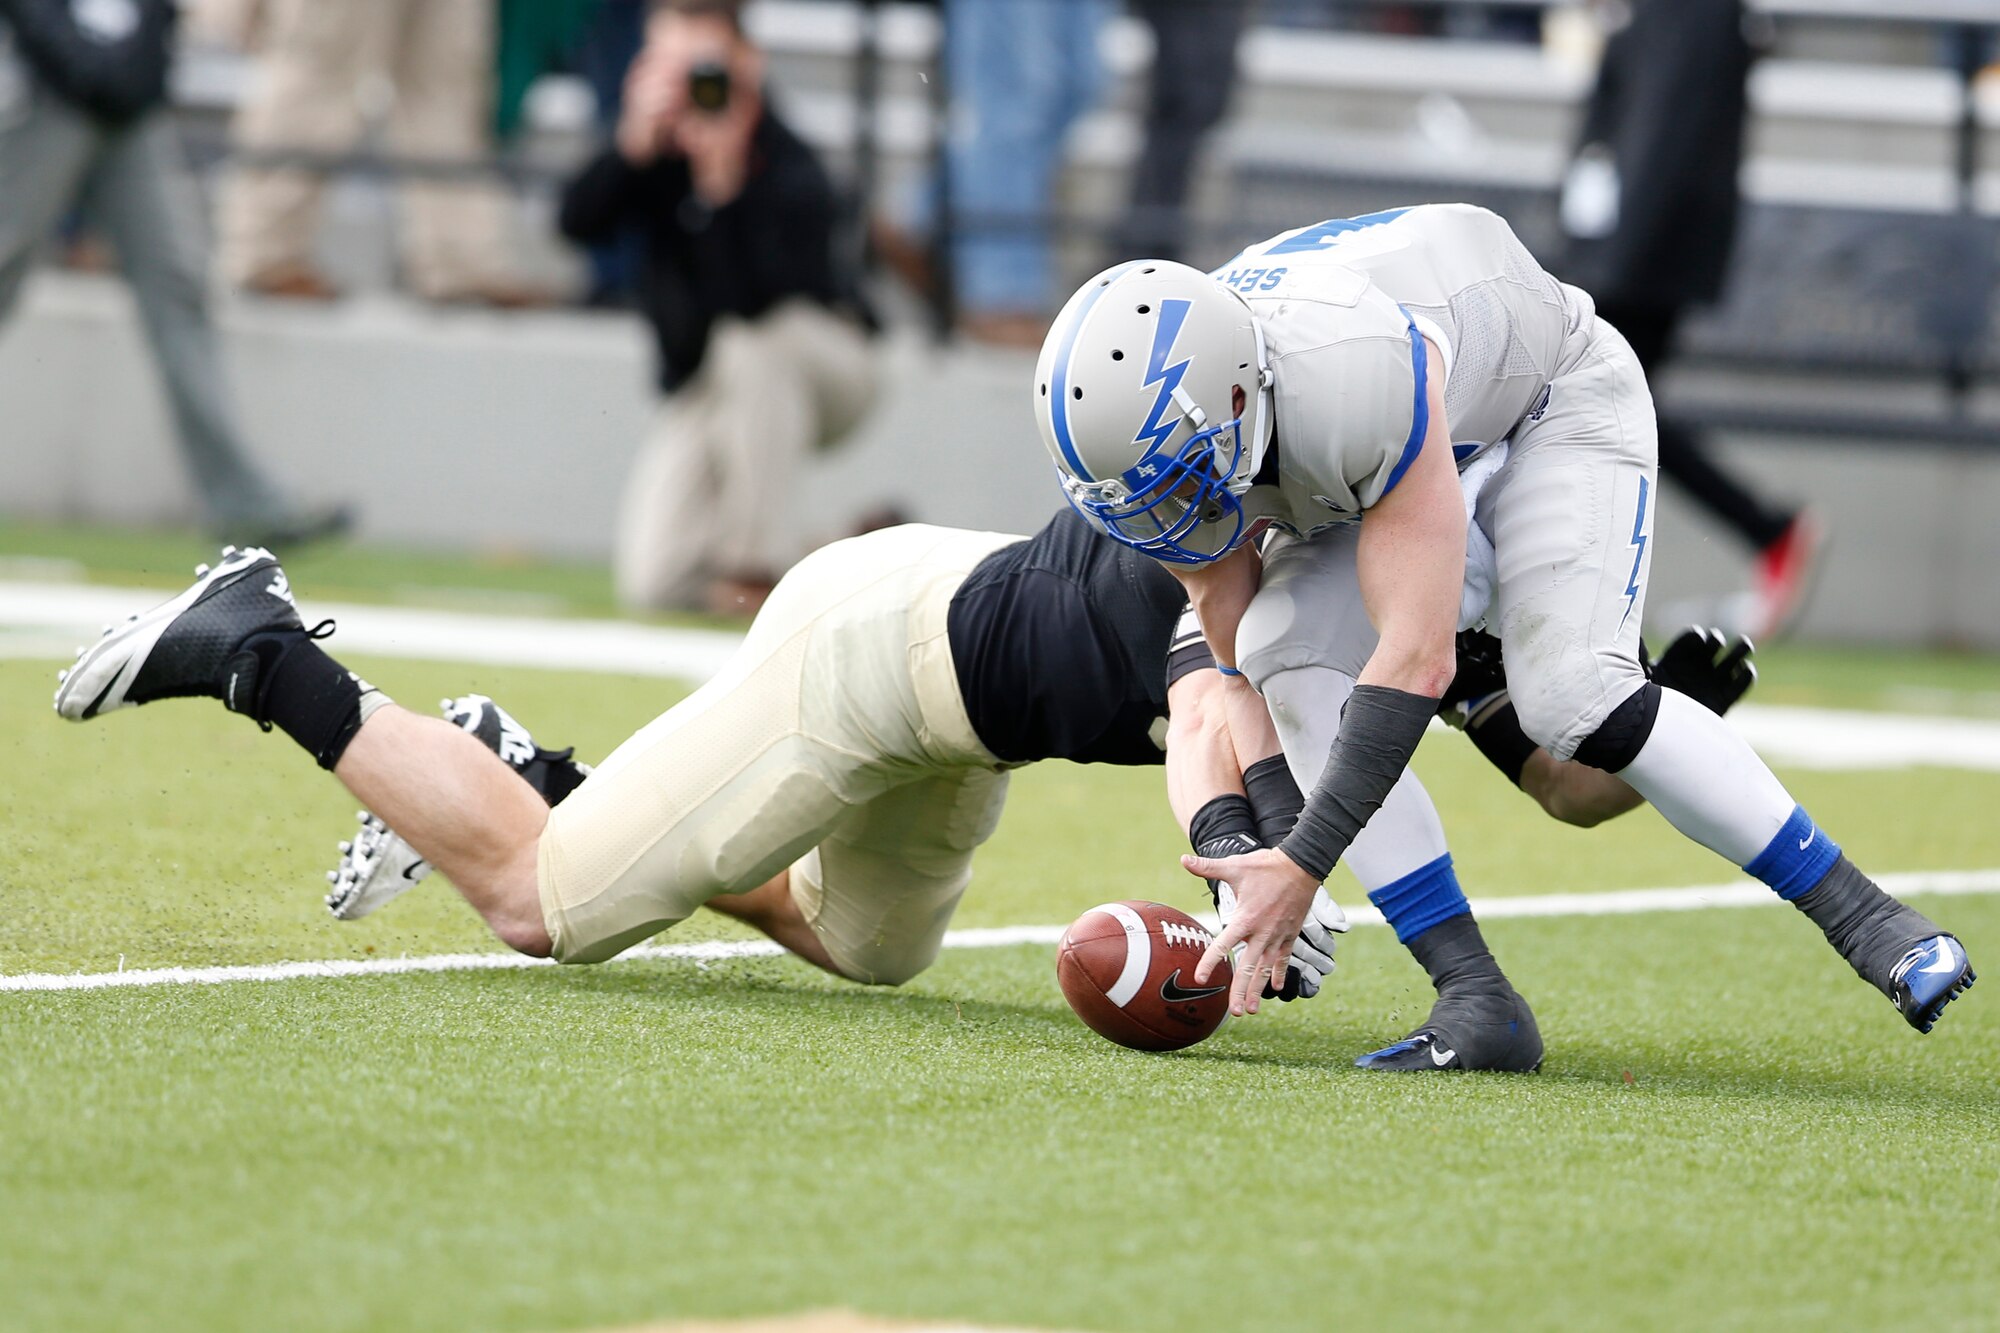 Air Force quarterback Connor Dietz and Army defensive lineman Joe Drummond fight for control of a fumble after a bad snap during the fourth quarter of the teams' match at Michie Stadium in West Point, N.Y., Nov. 3, 2012. Black Knights linebacker Nate Combs recovered the ball in the Falcons' end zone to take a 41-21 lead and kill Air Force's hopes for a comeback. (U.S. Air Force photo/Tommy Gilligan)